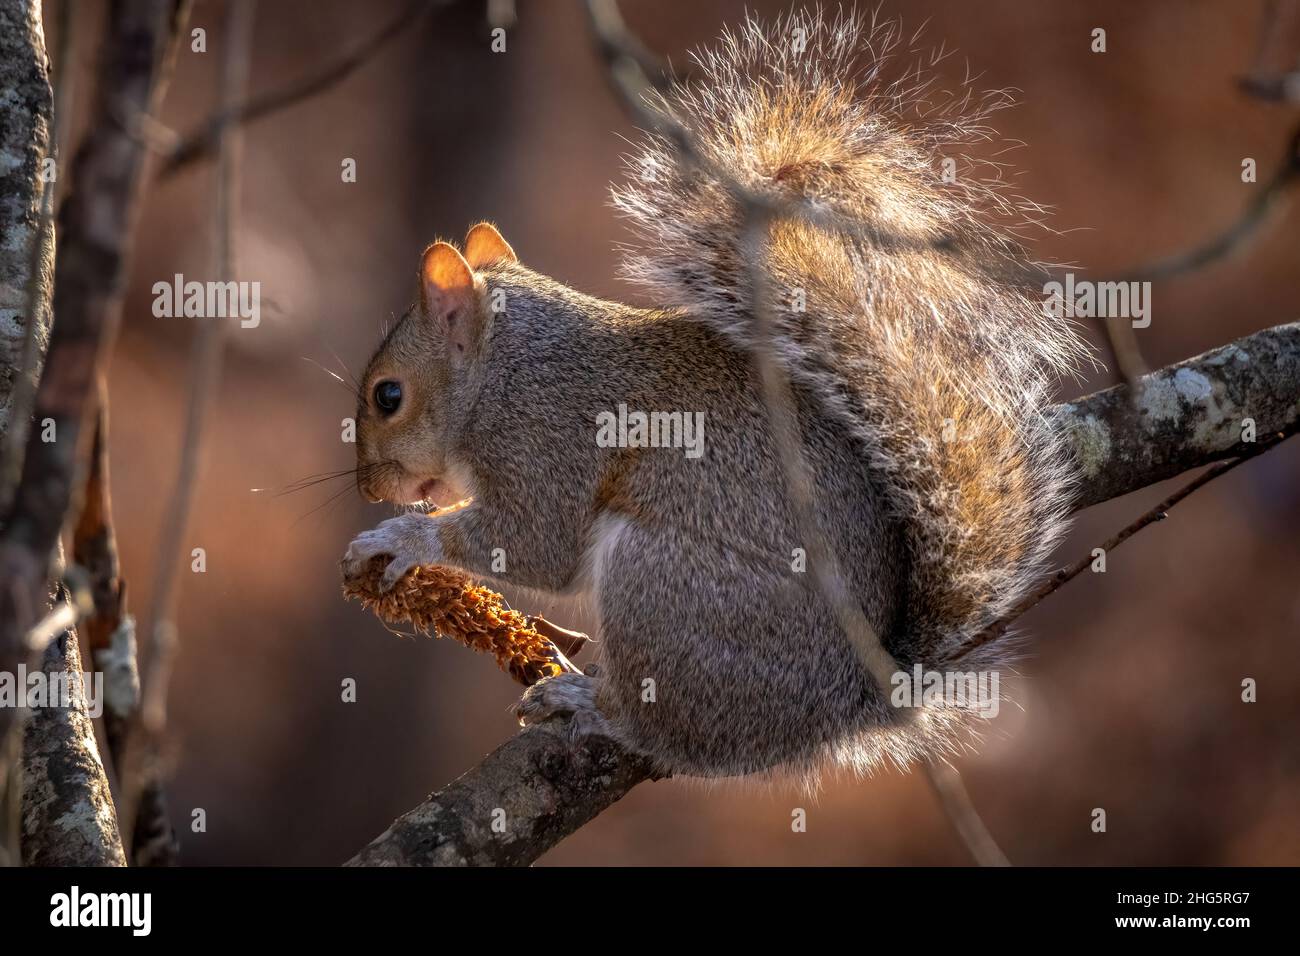 An Eastern Gray Squirrel extracts seeds from a pine cone for a winter snack. Raleigh, North Carolina. Stock Photo